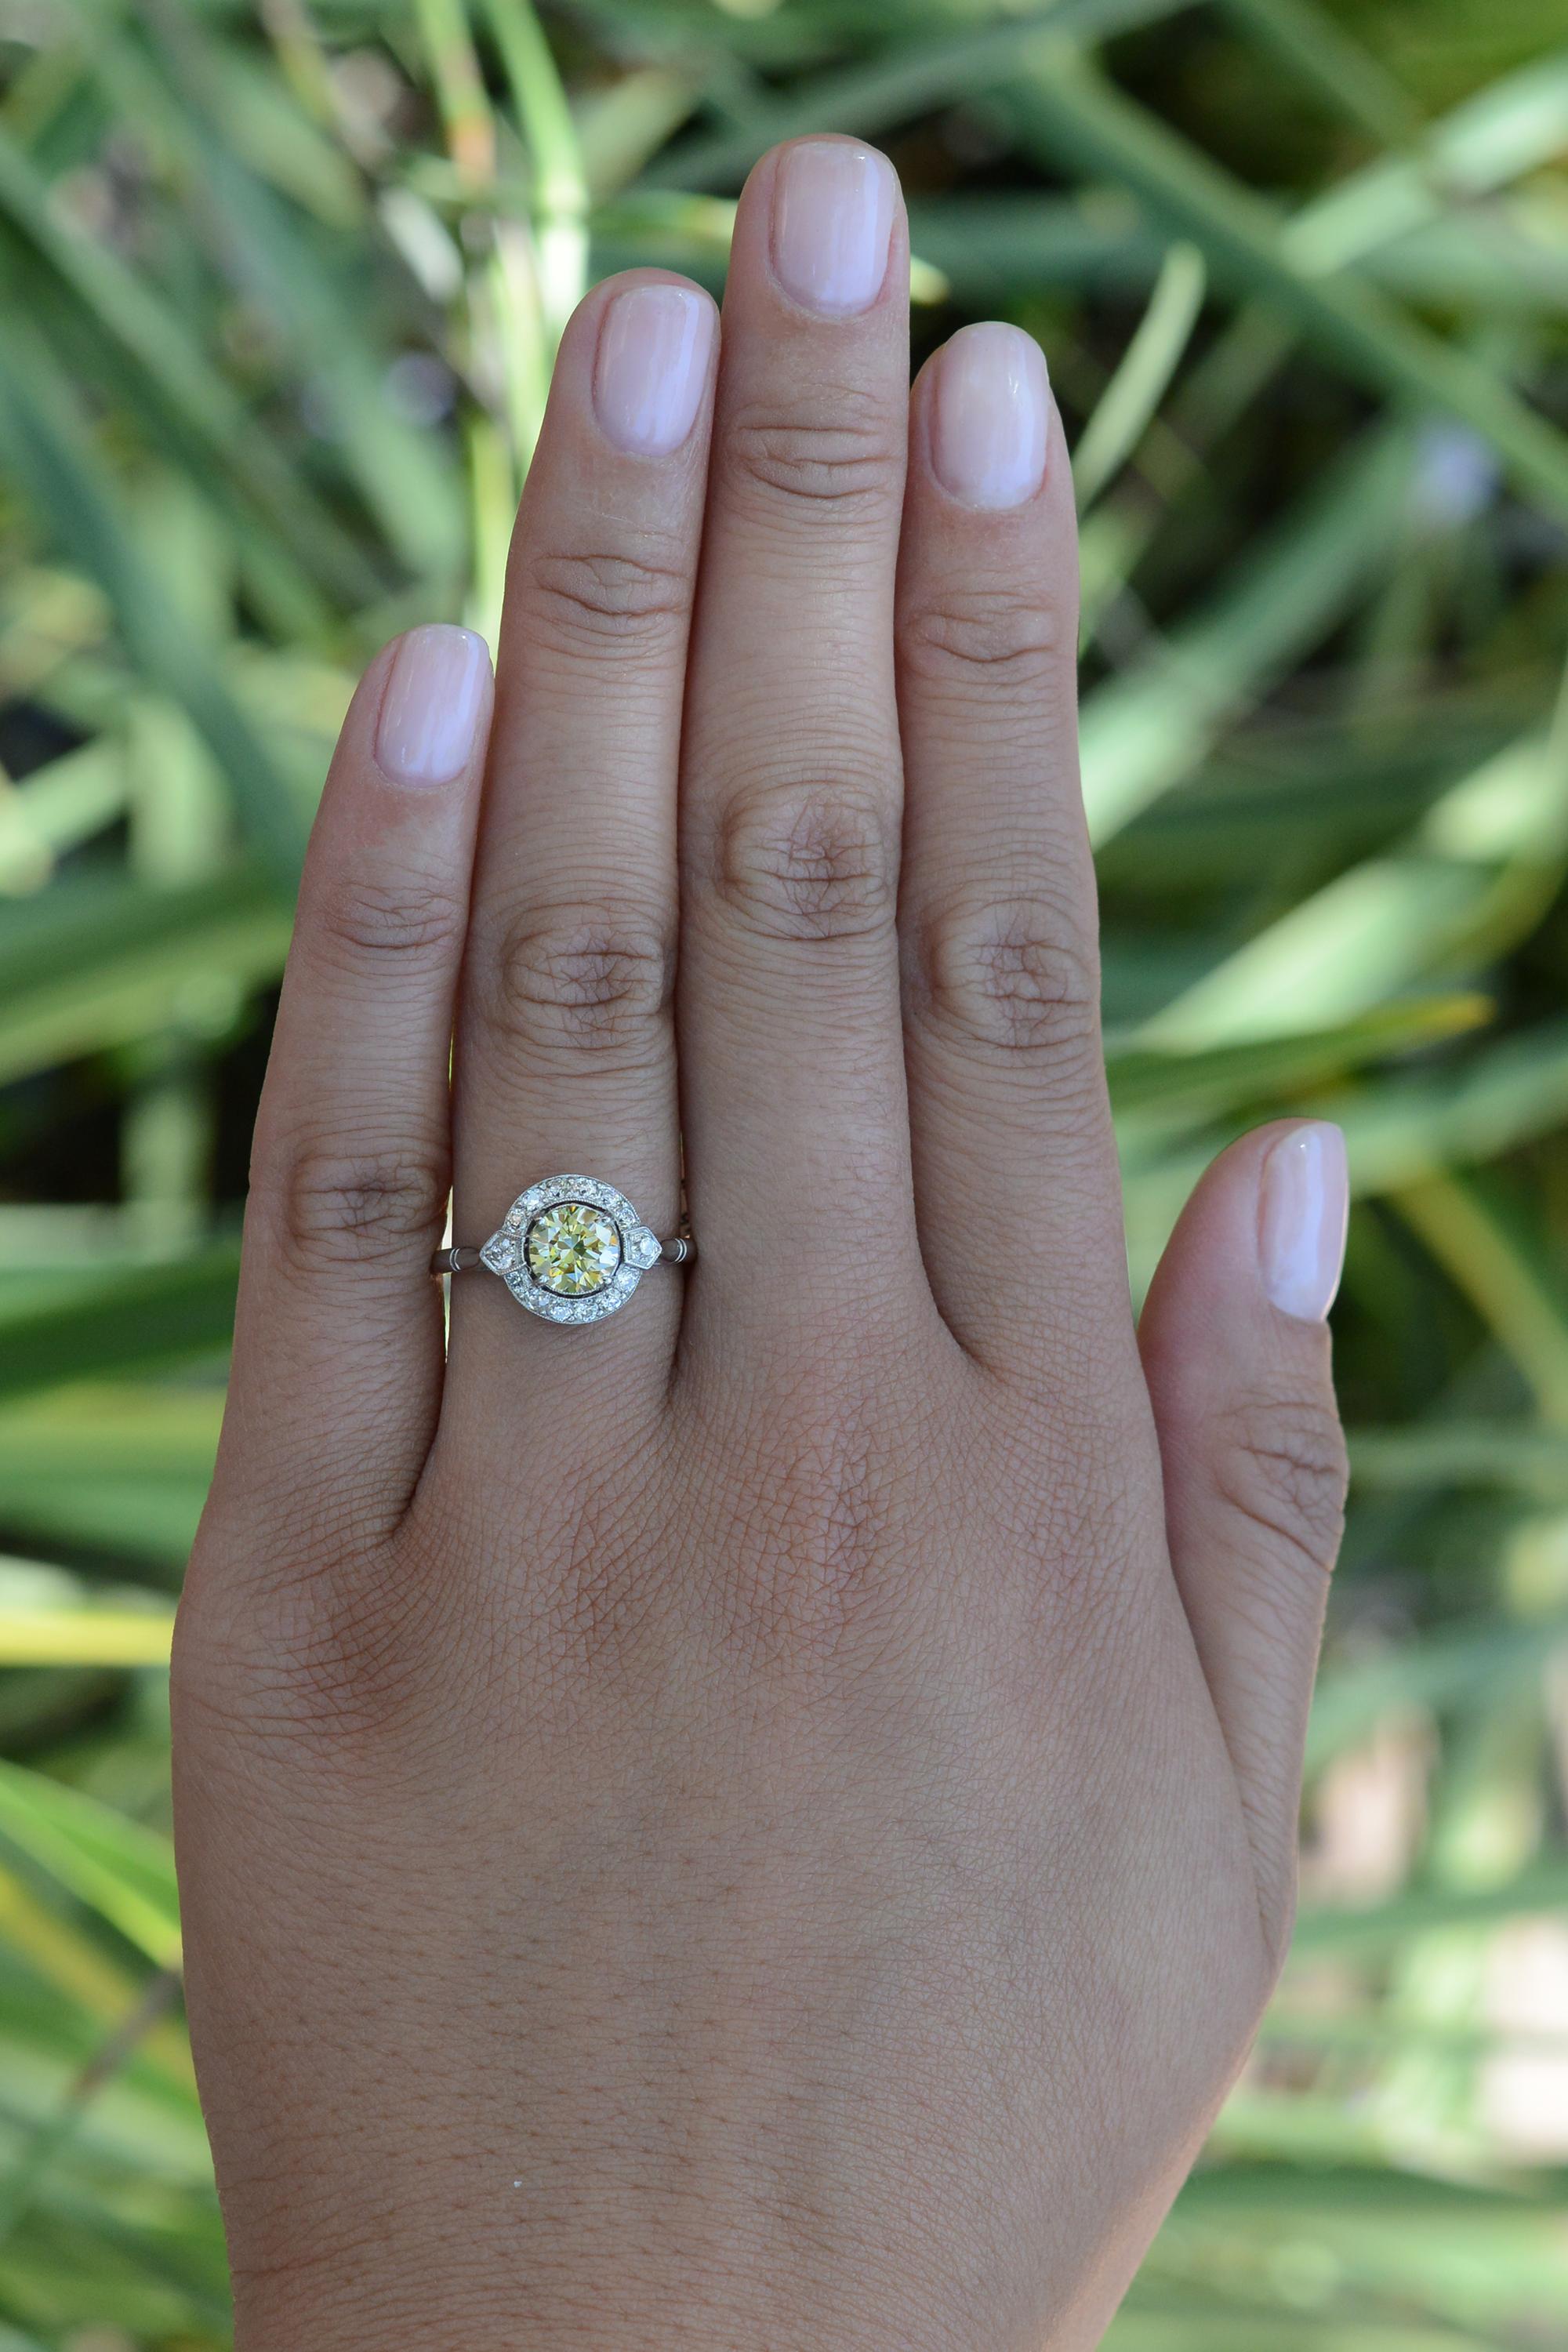 Celebrate your special moment with this timeless, vintage diamond engagement ring from the 1920s. With its prominent and glowing old European cut round yellow diamond, this authentic Art Deco era masterpiece offers unique glamour and undeniable